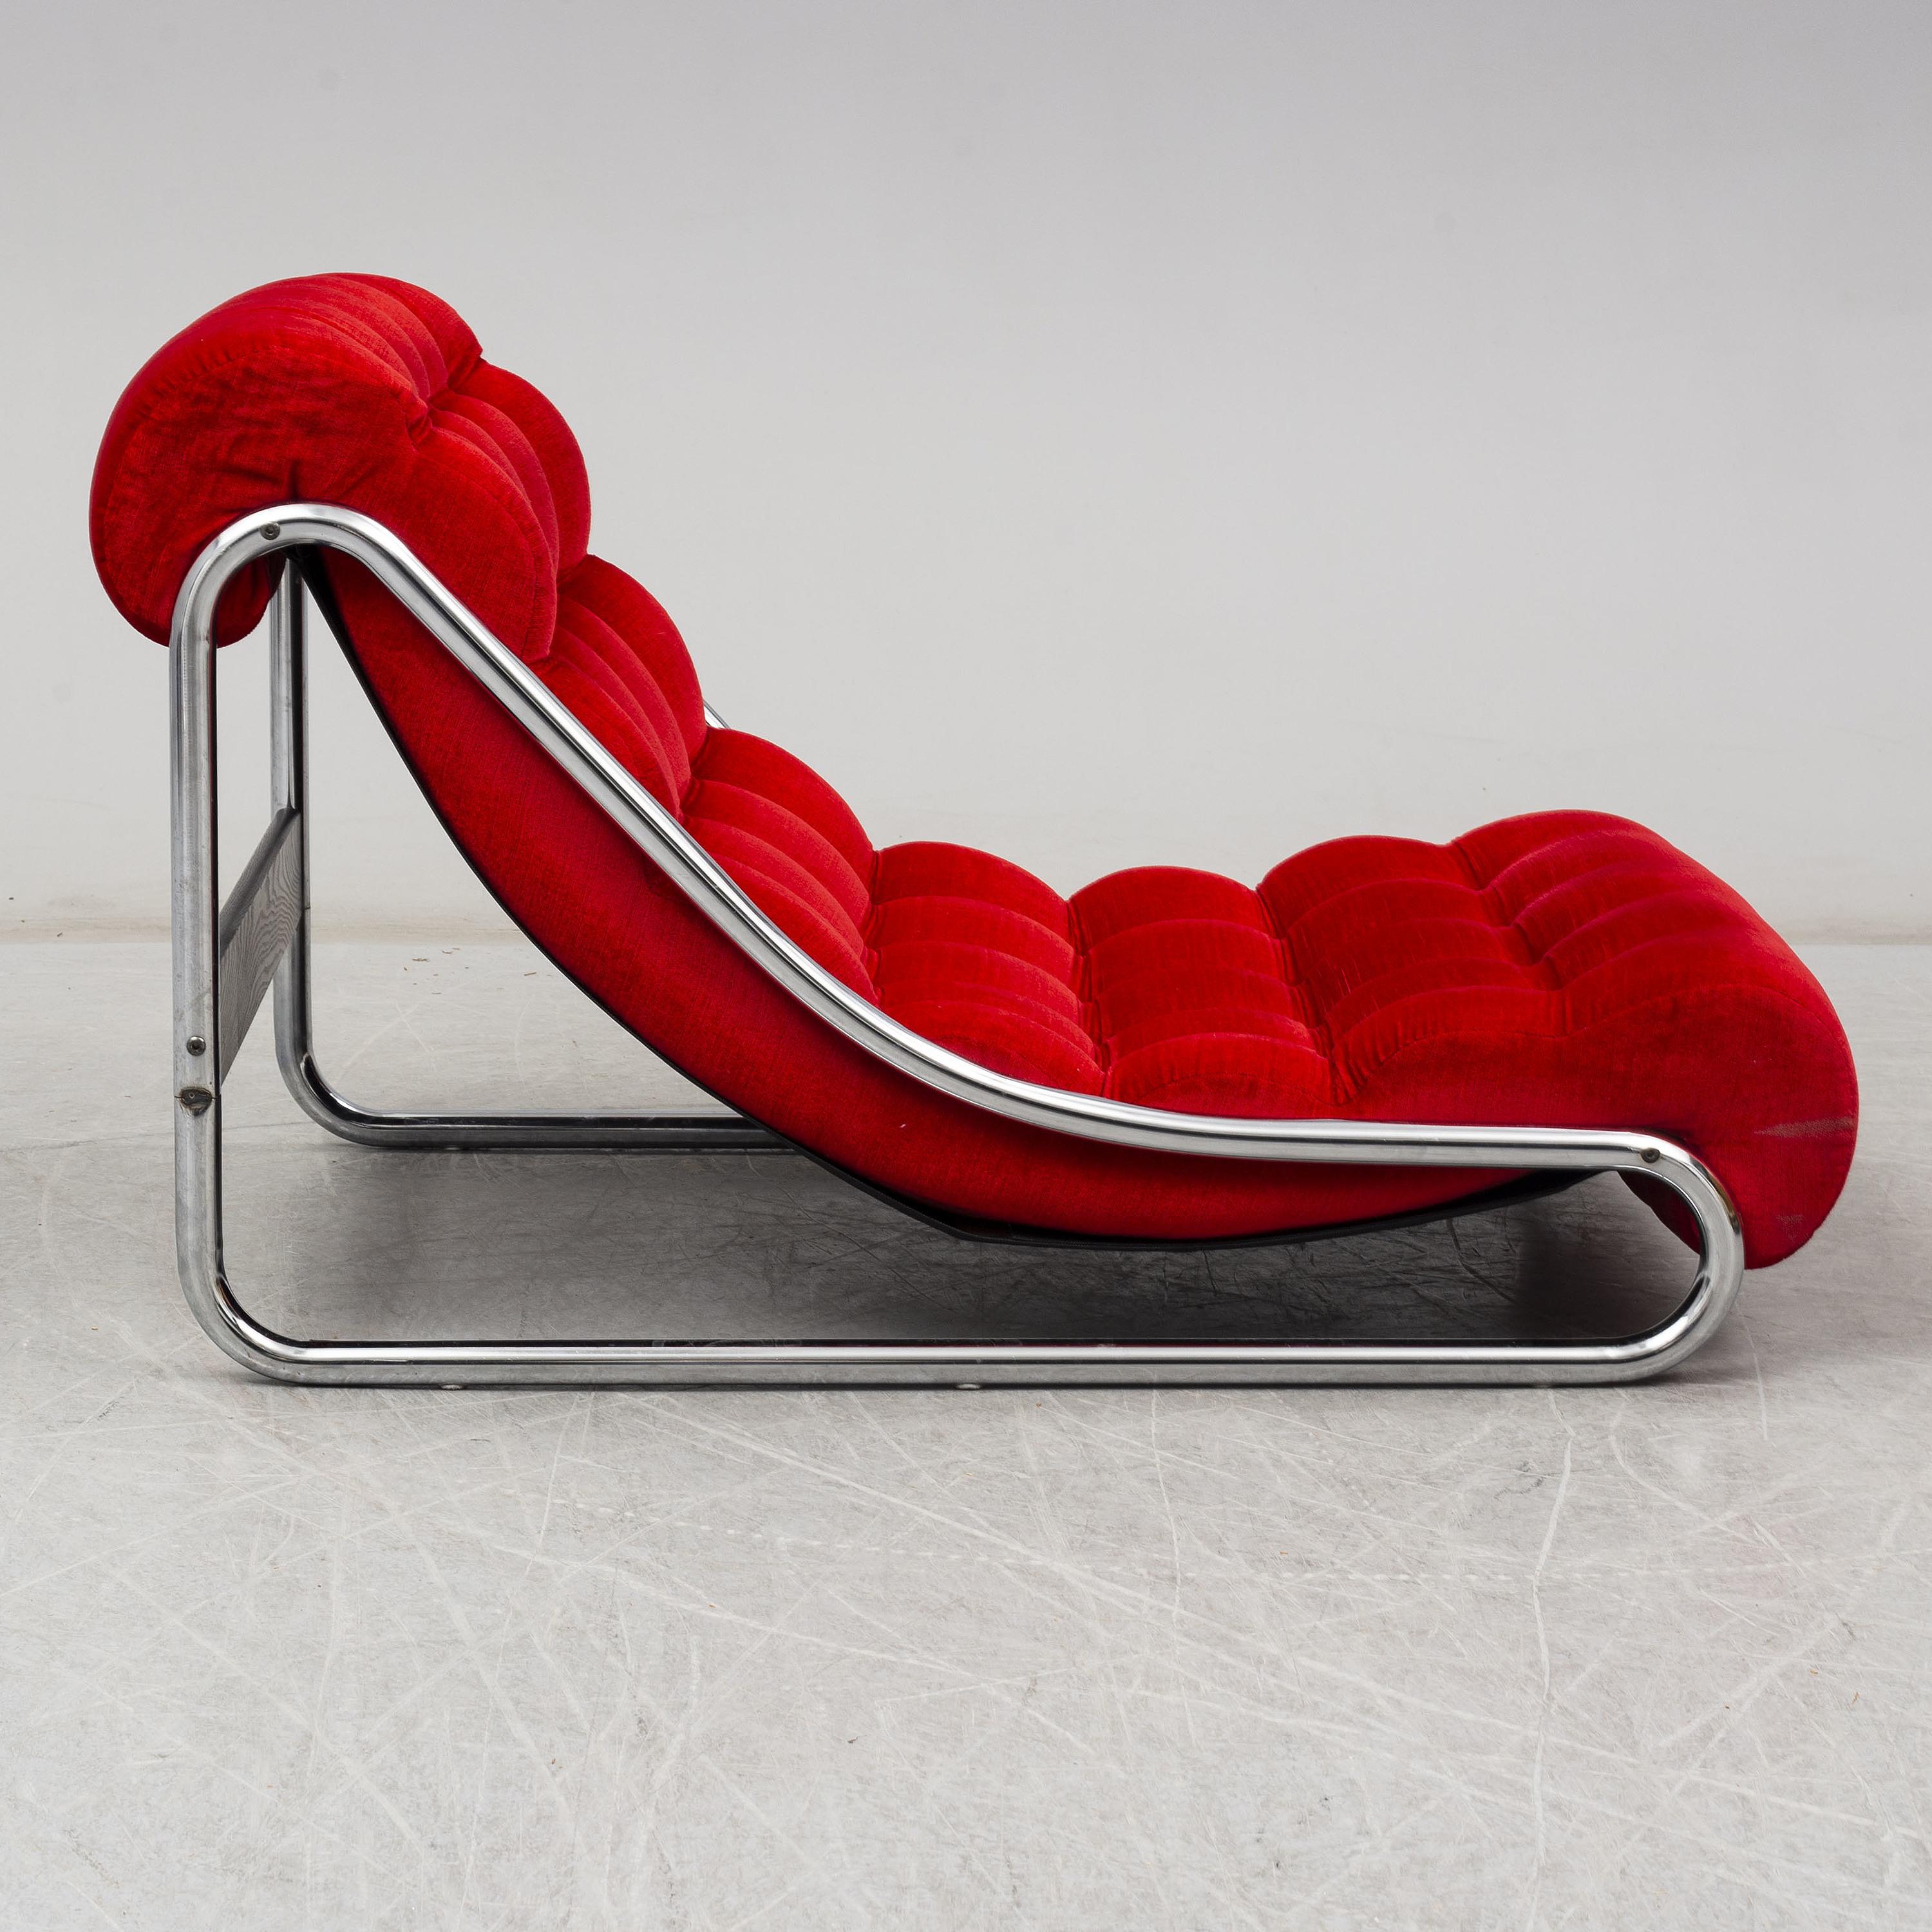 An ‘Impala’ easy chair designed by Gillis Lundgren for IKEA, with tubular steel frame and the curved seat upholstered in a vibrant red fabric.